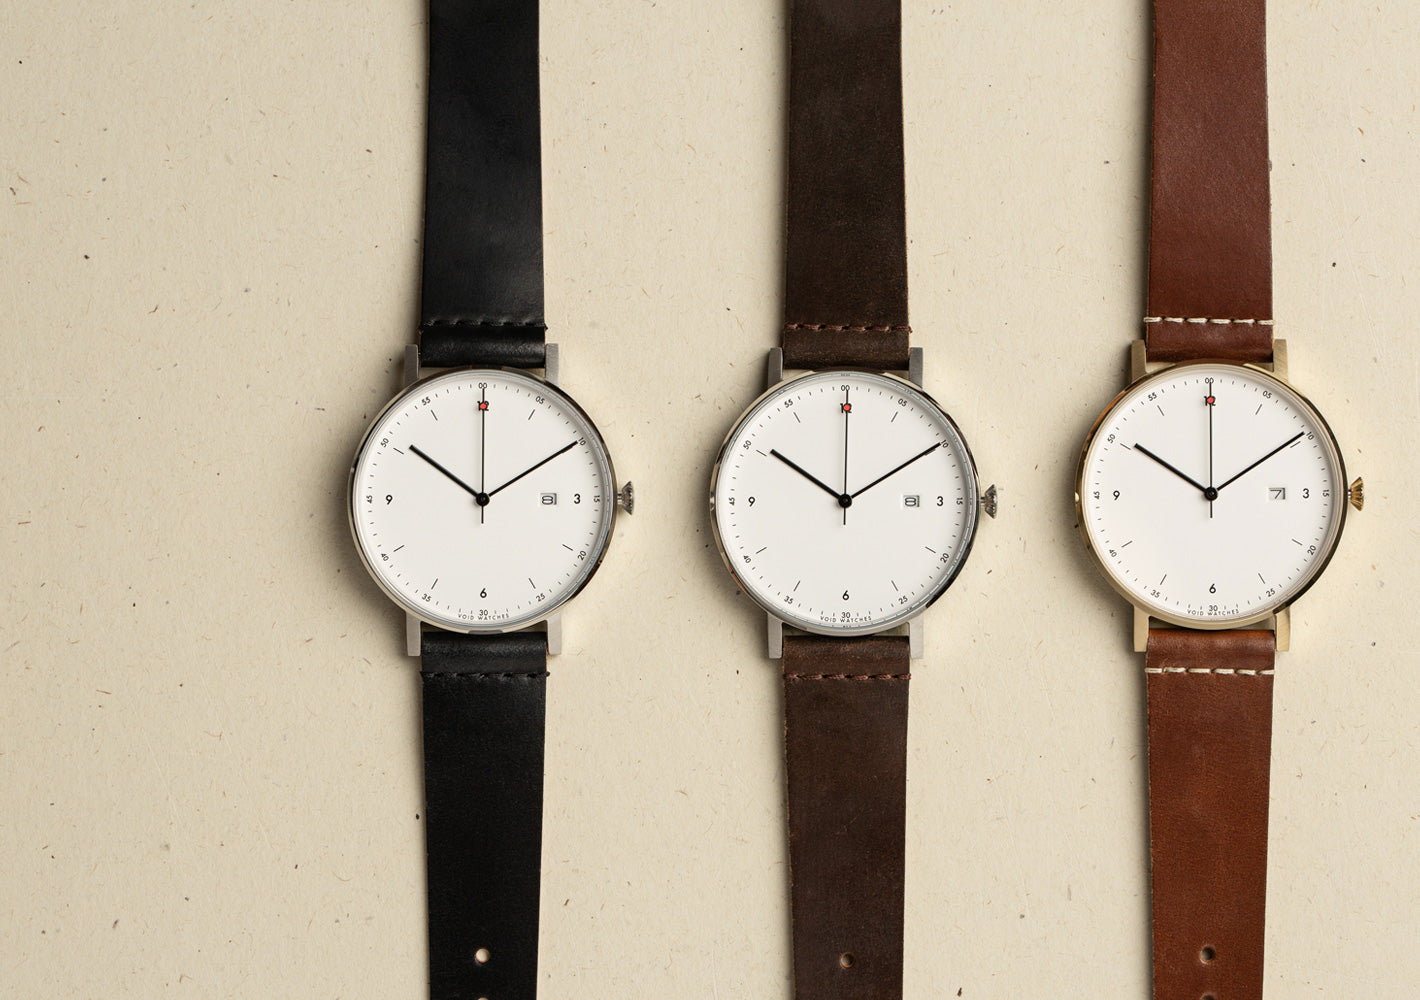 The PKG01 Horween Collection from VOID Watches, designed by Patrick Kim-Gustafson.